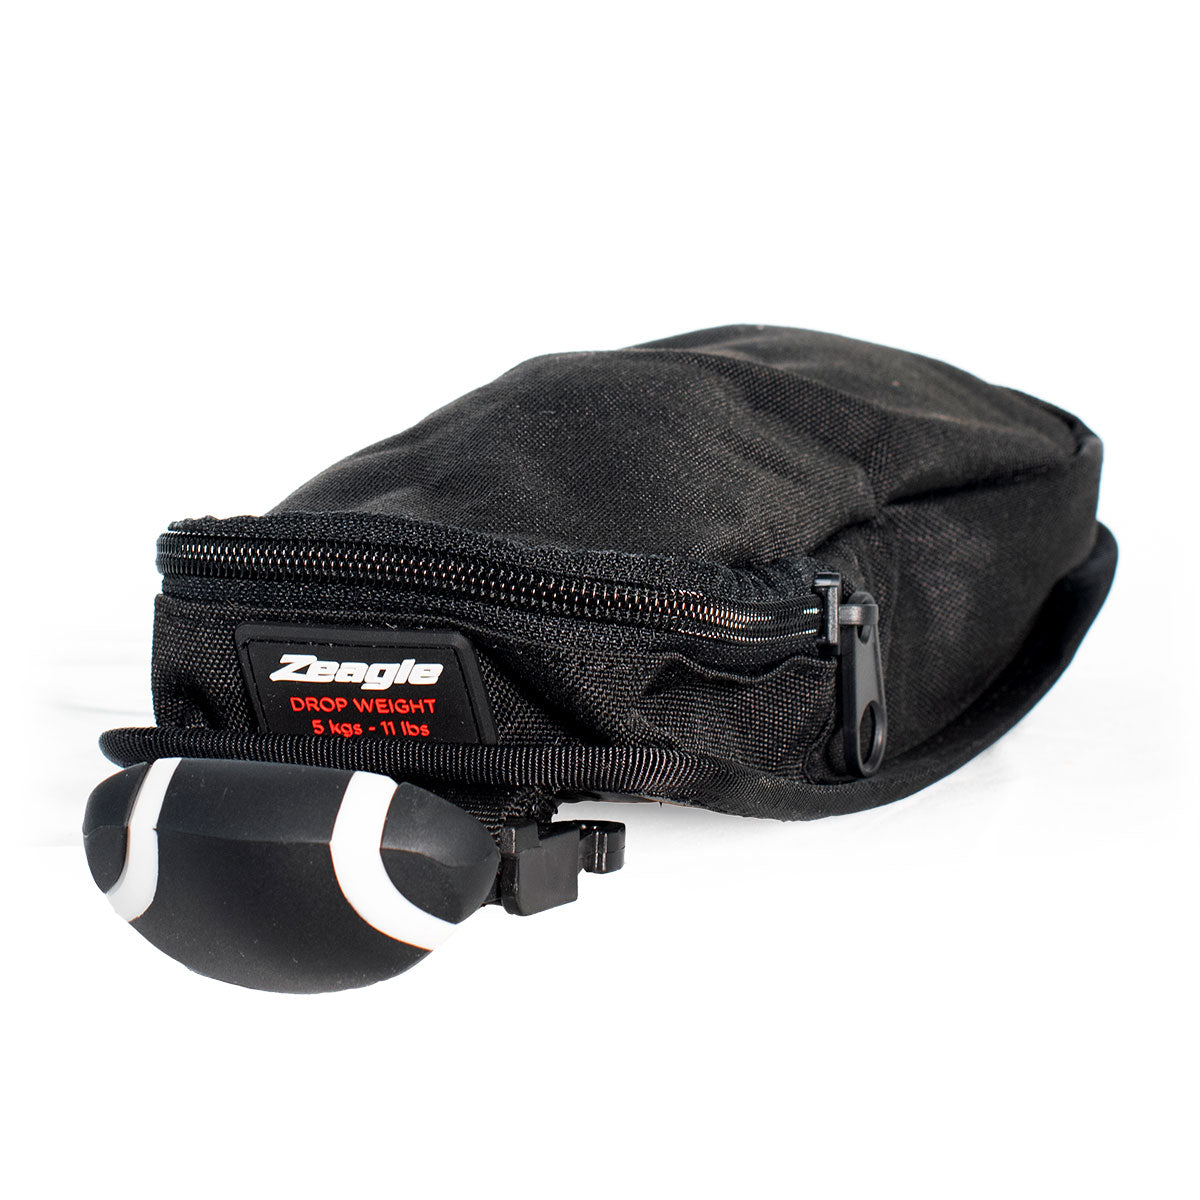 Open Box Zeagle Removable weight pocket